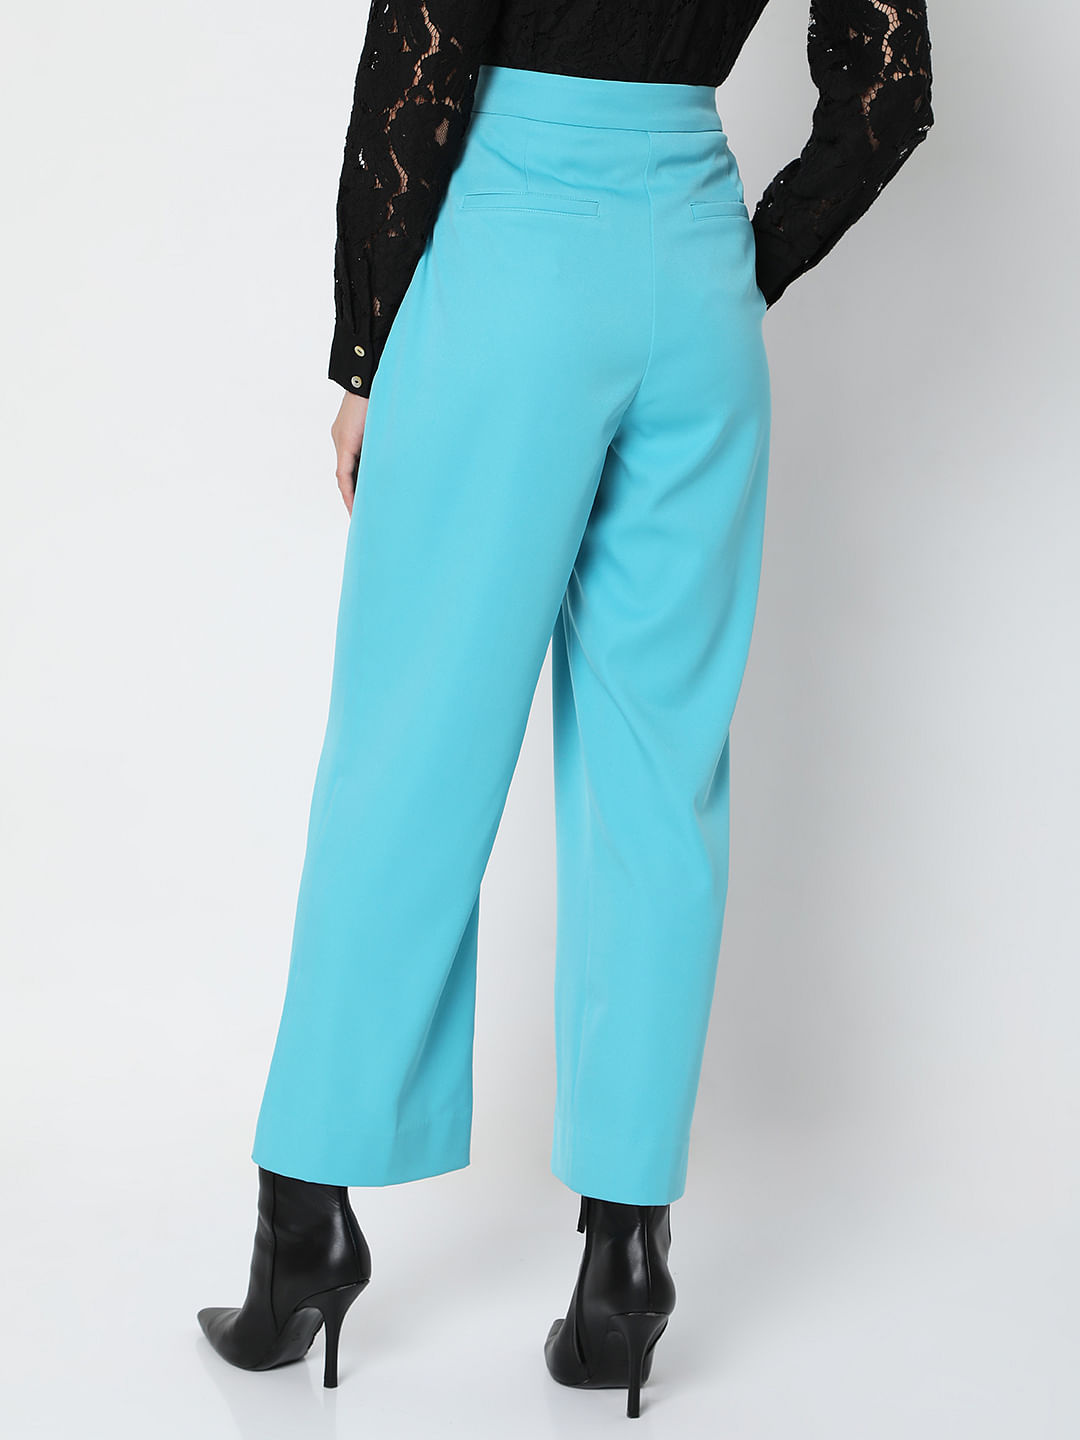 Ruffled HighWaist Trousers  35 Pant Outfit Ideas That  Gasp  Arent  Jeans  POPSUGAR Fashion Middle East Photo 19